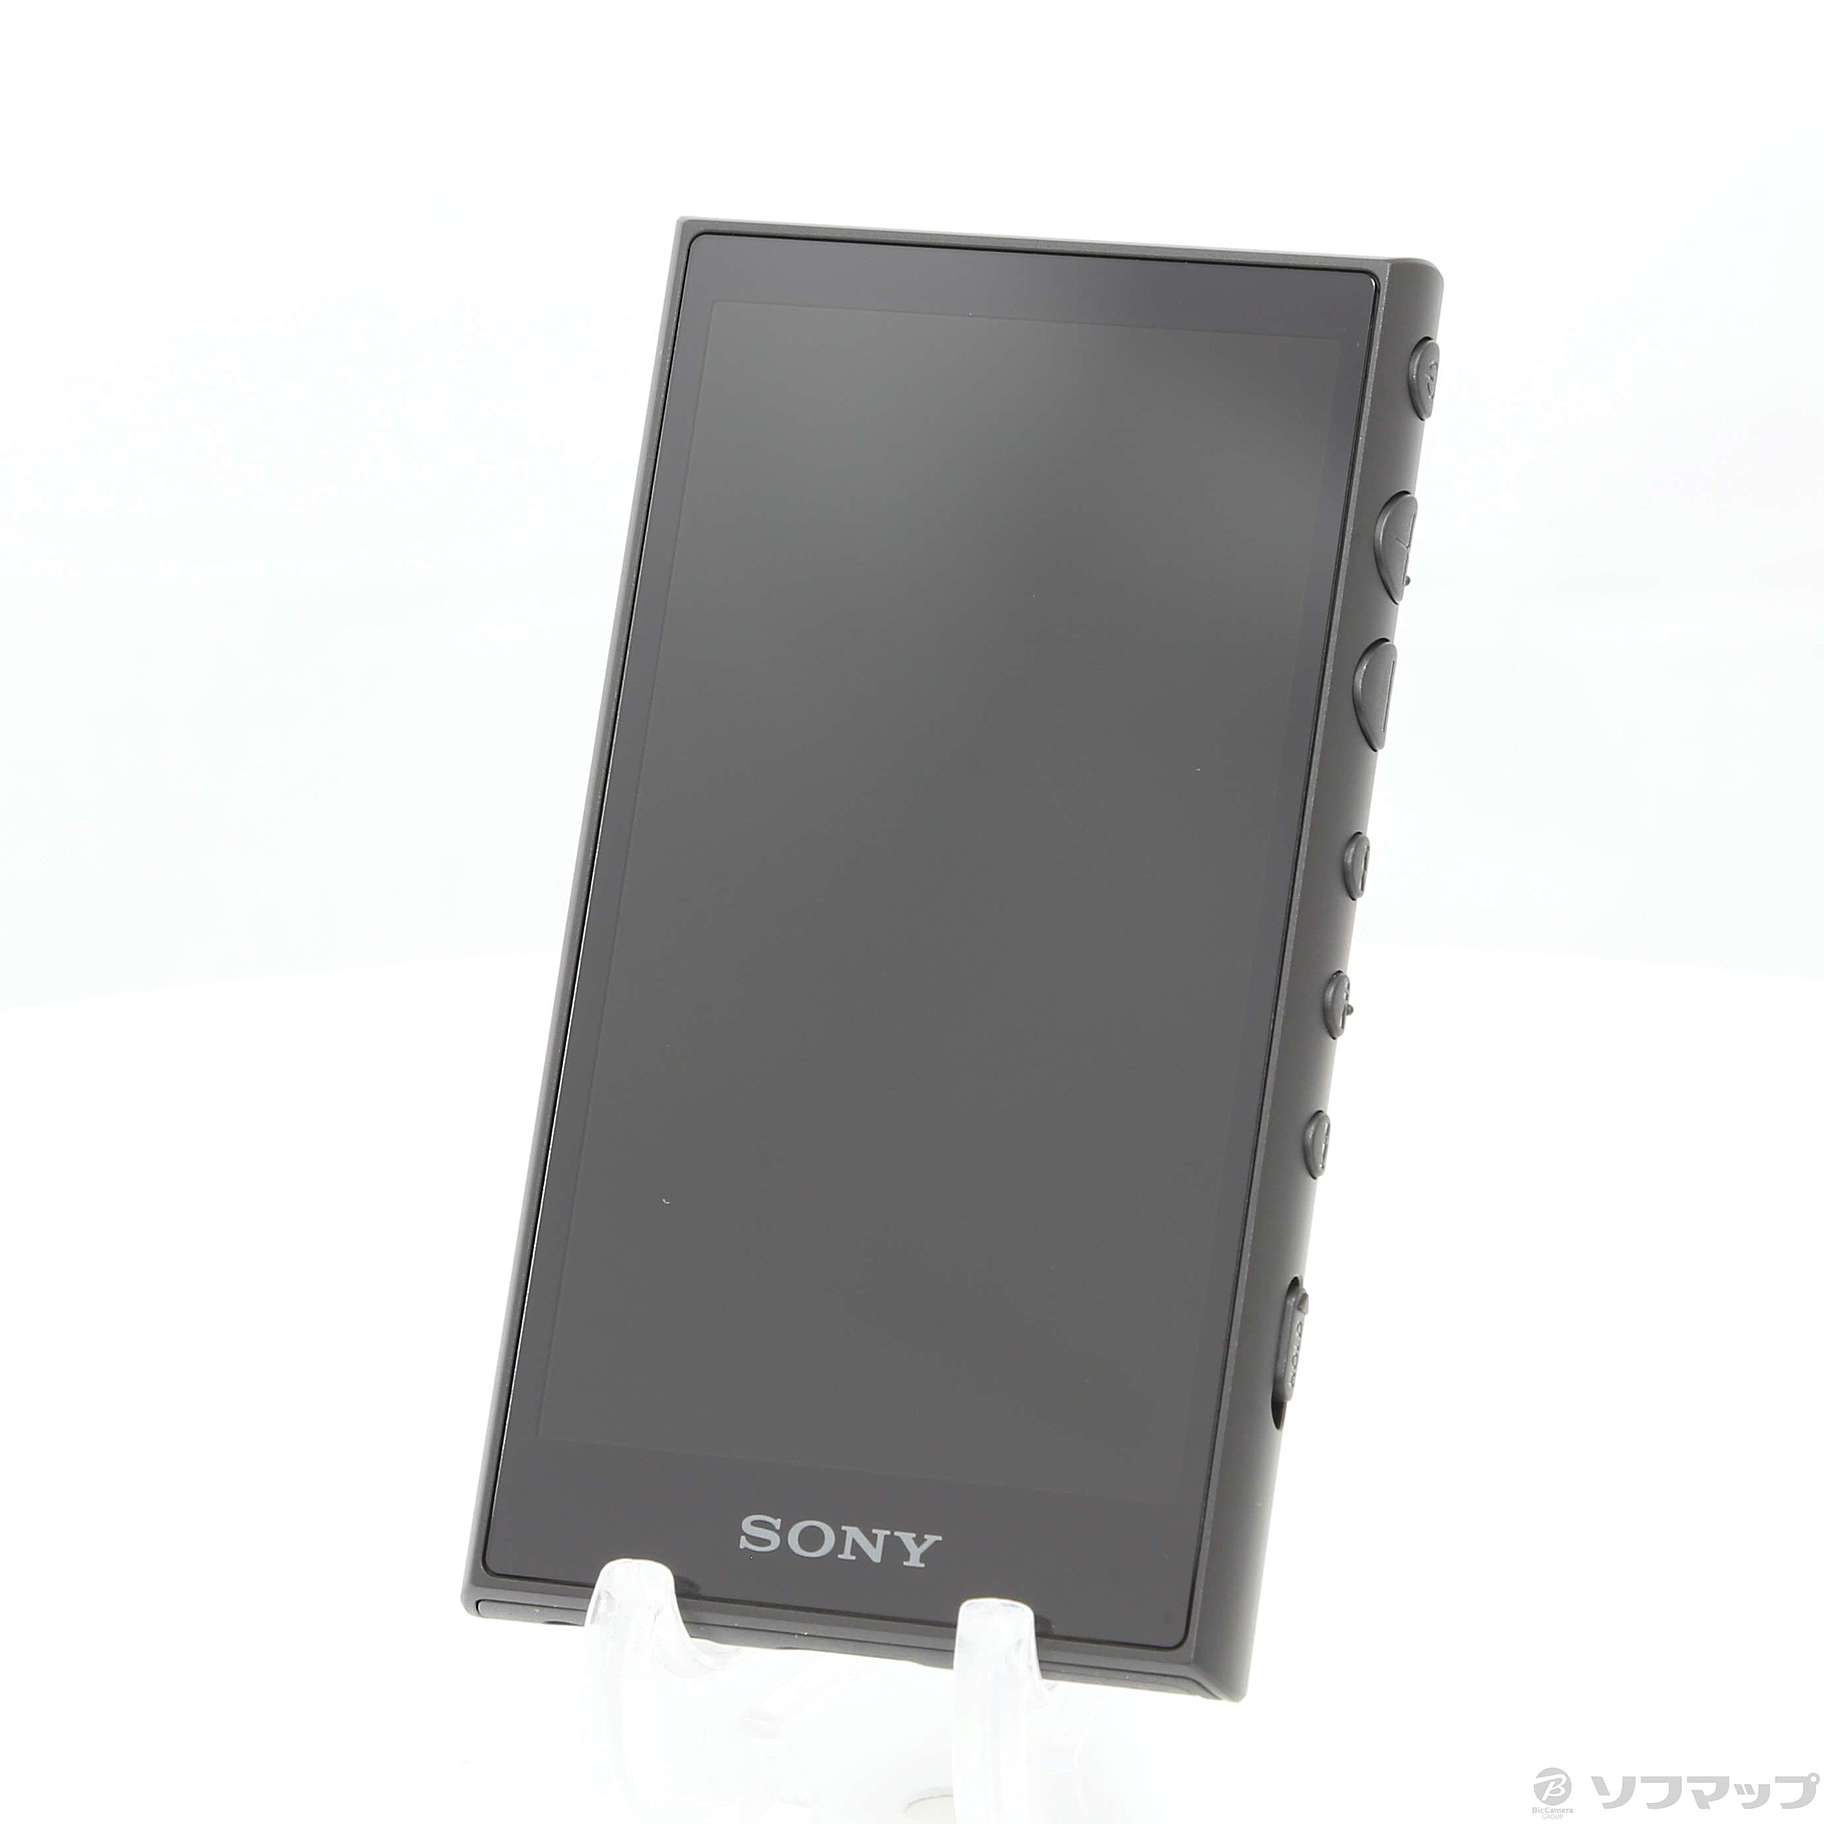 SONY ウォークマン NW-A100TPS 新品未使用